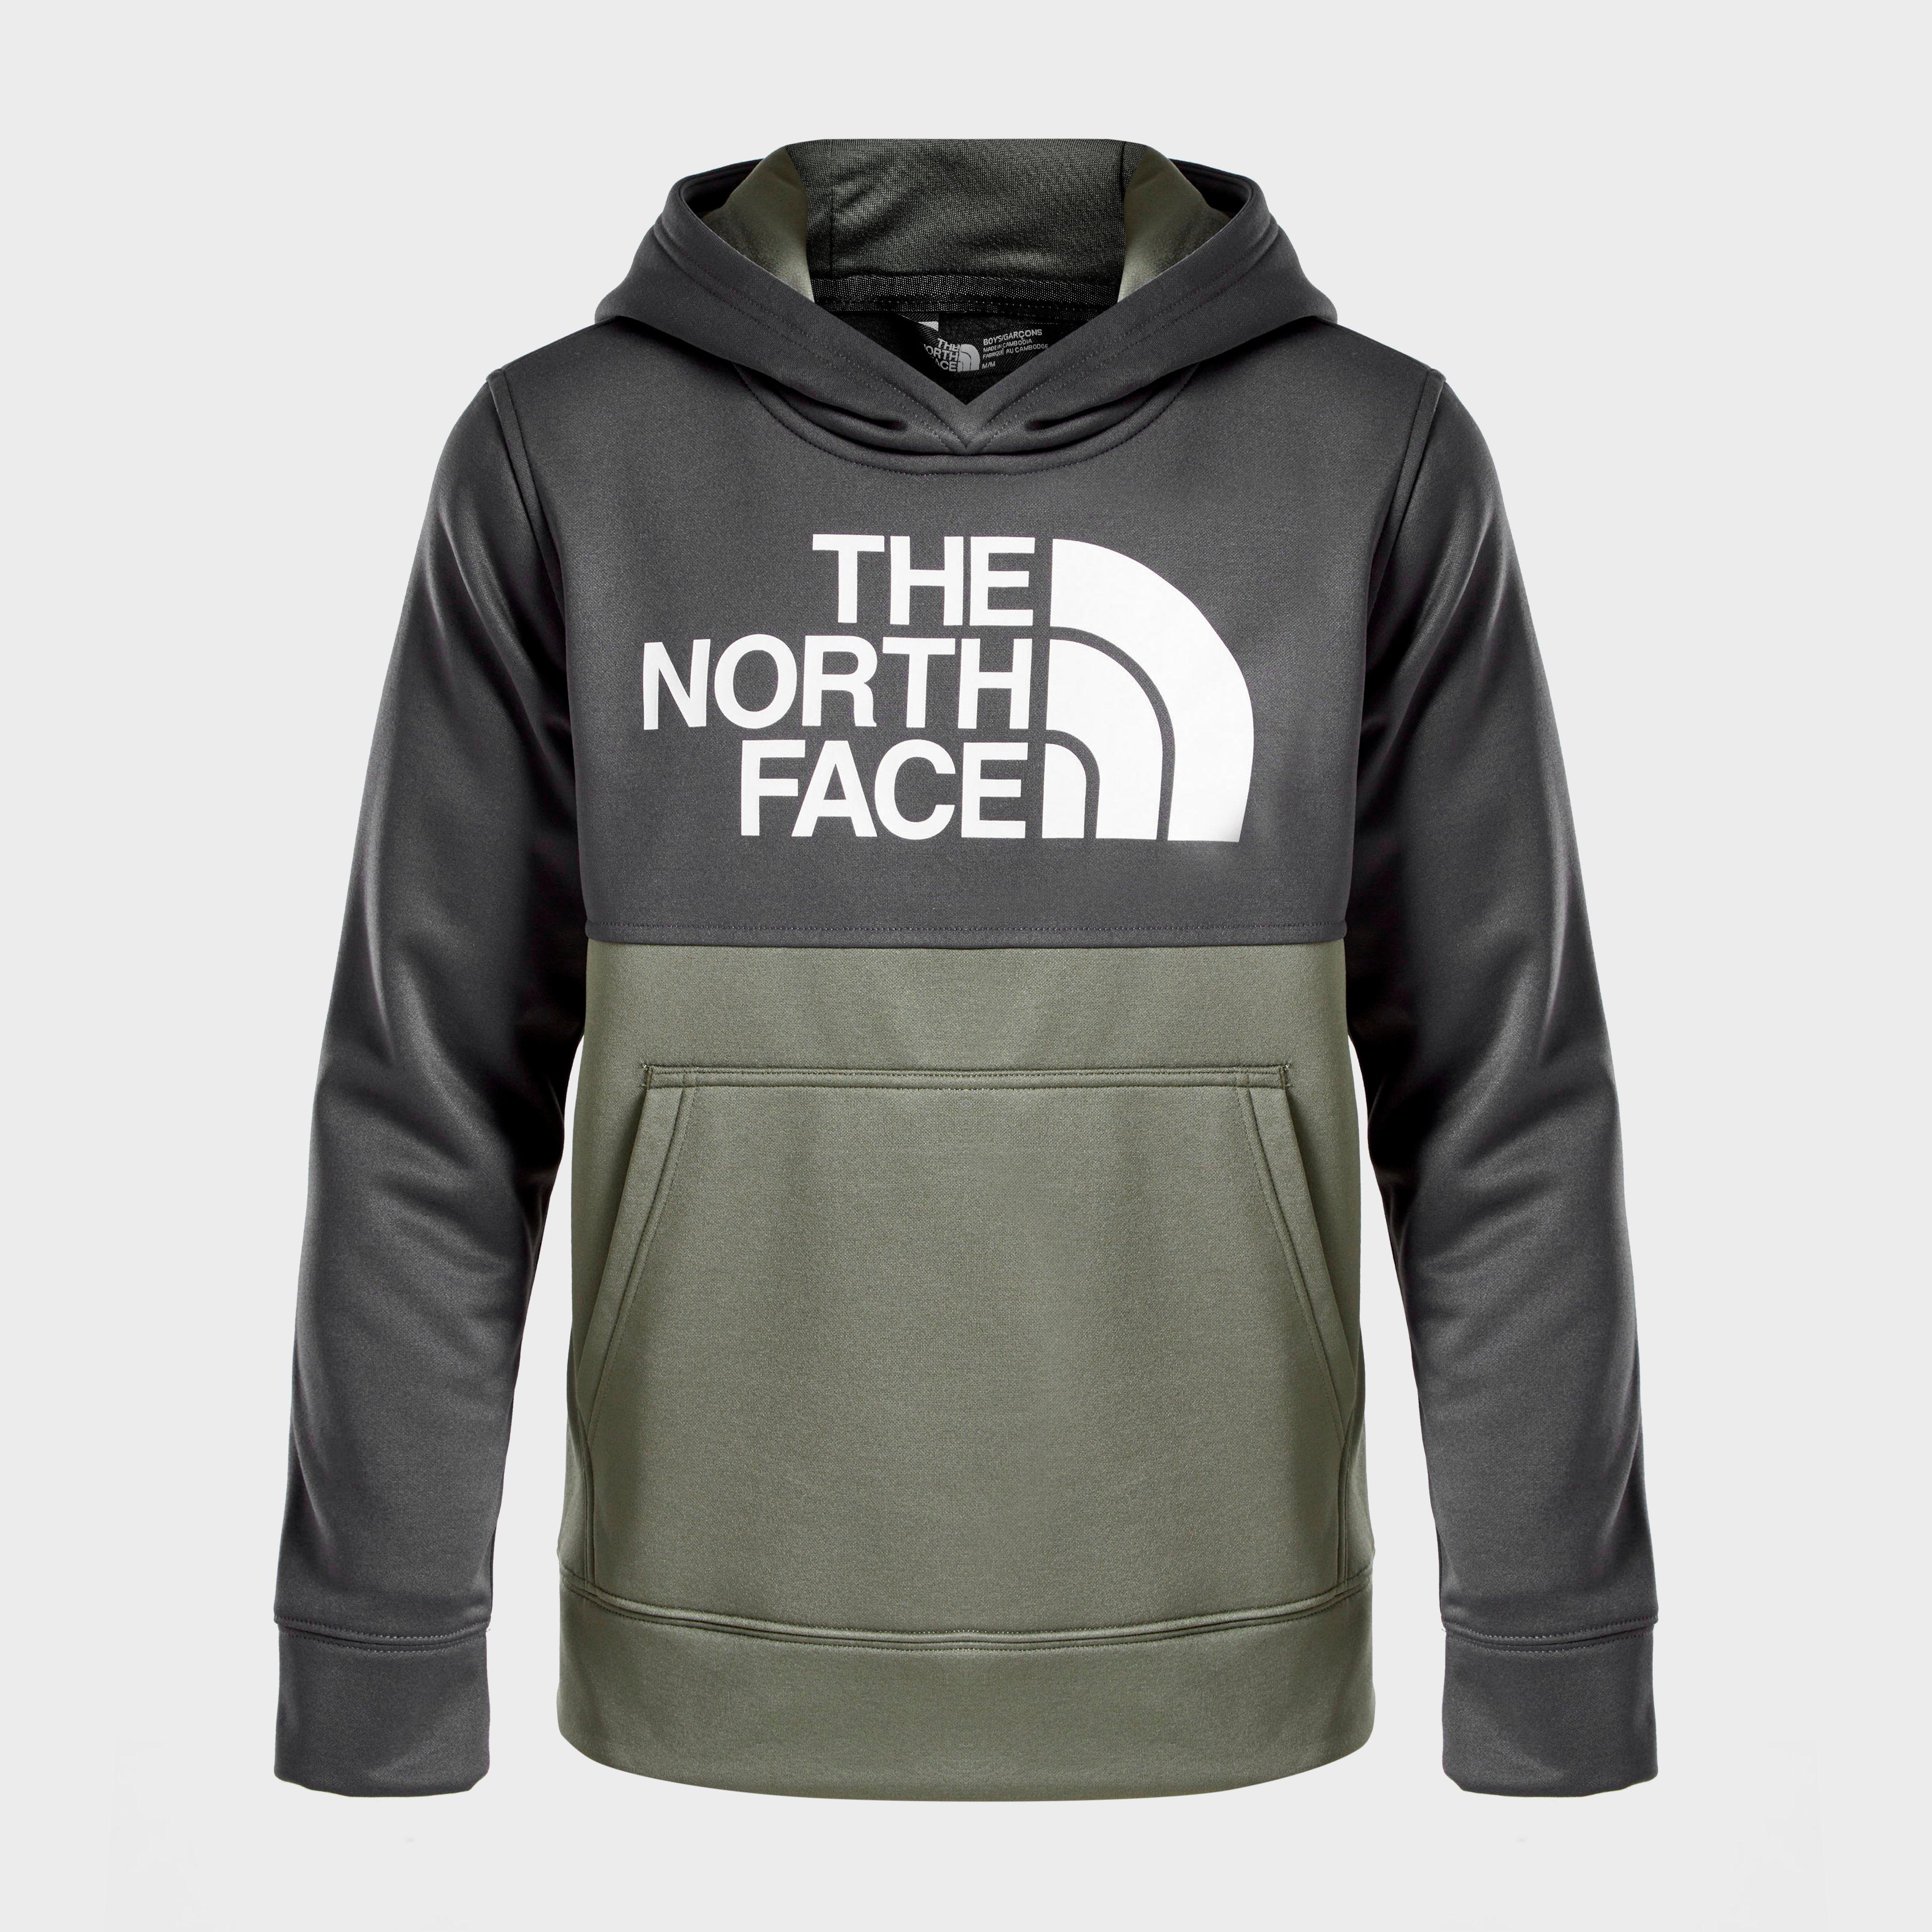 north face kids clothing